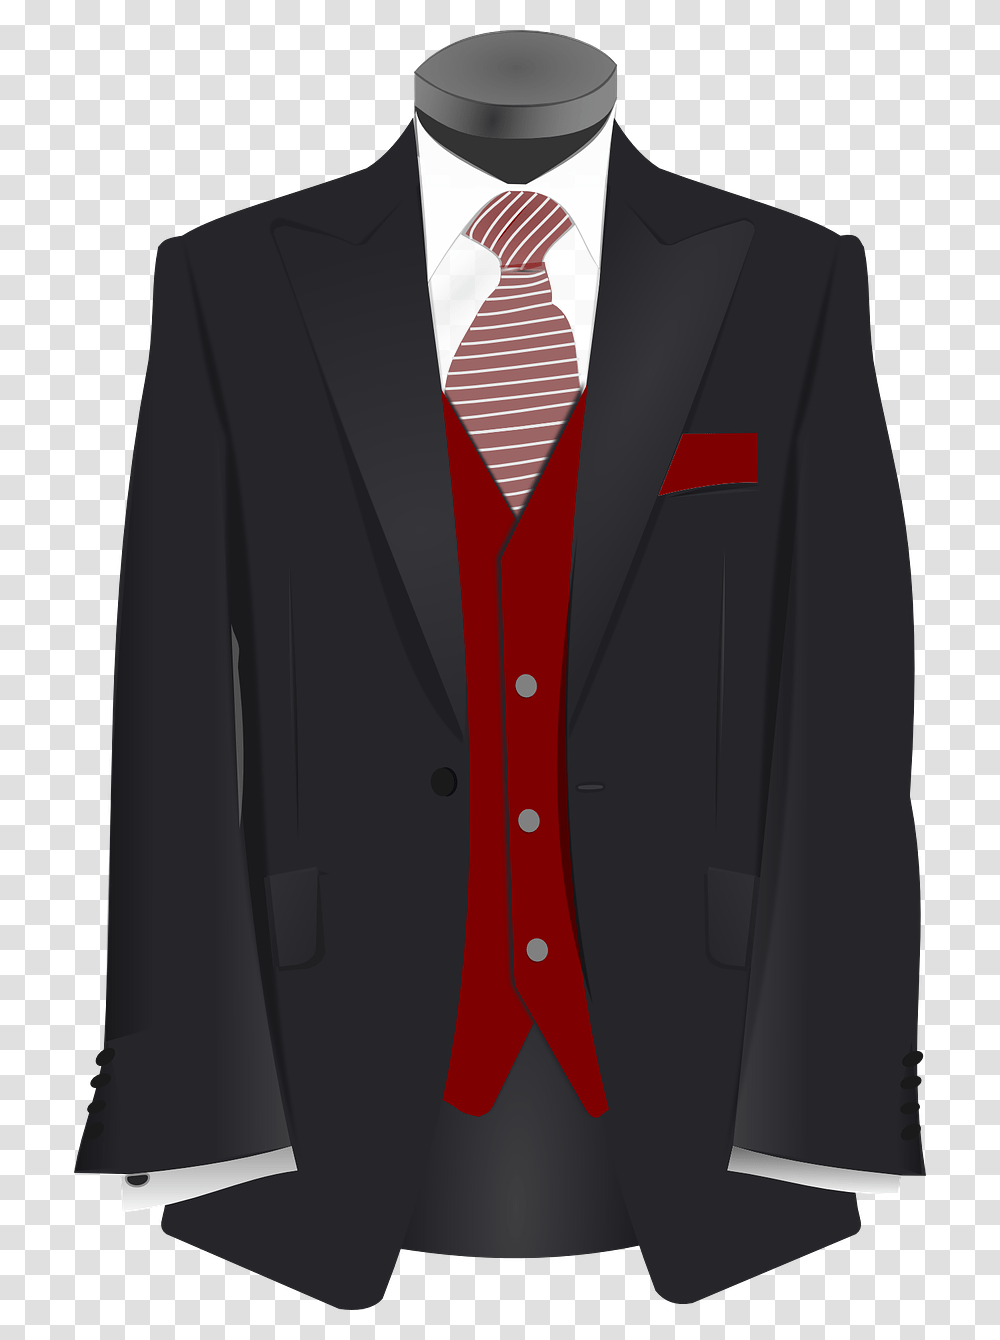 Suit And Tie Cartoon, Apparel, Accessories, Accessory Transparent Png